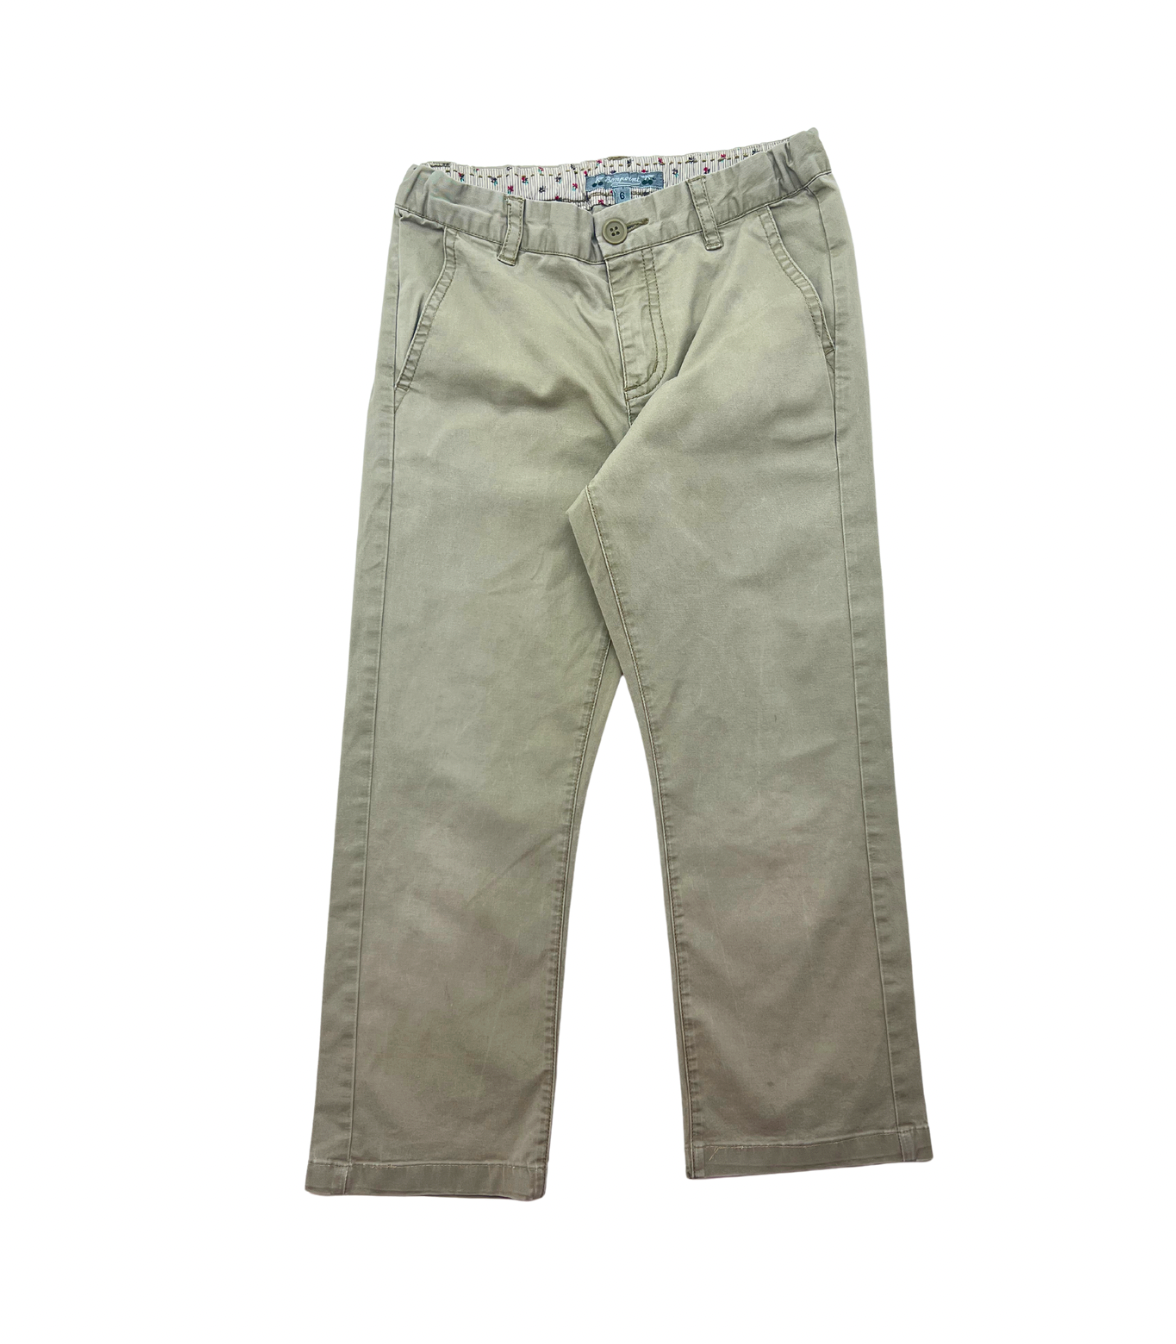 BONPOINT - Beige pants - 6 years old